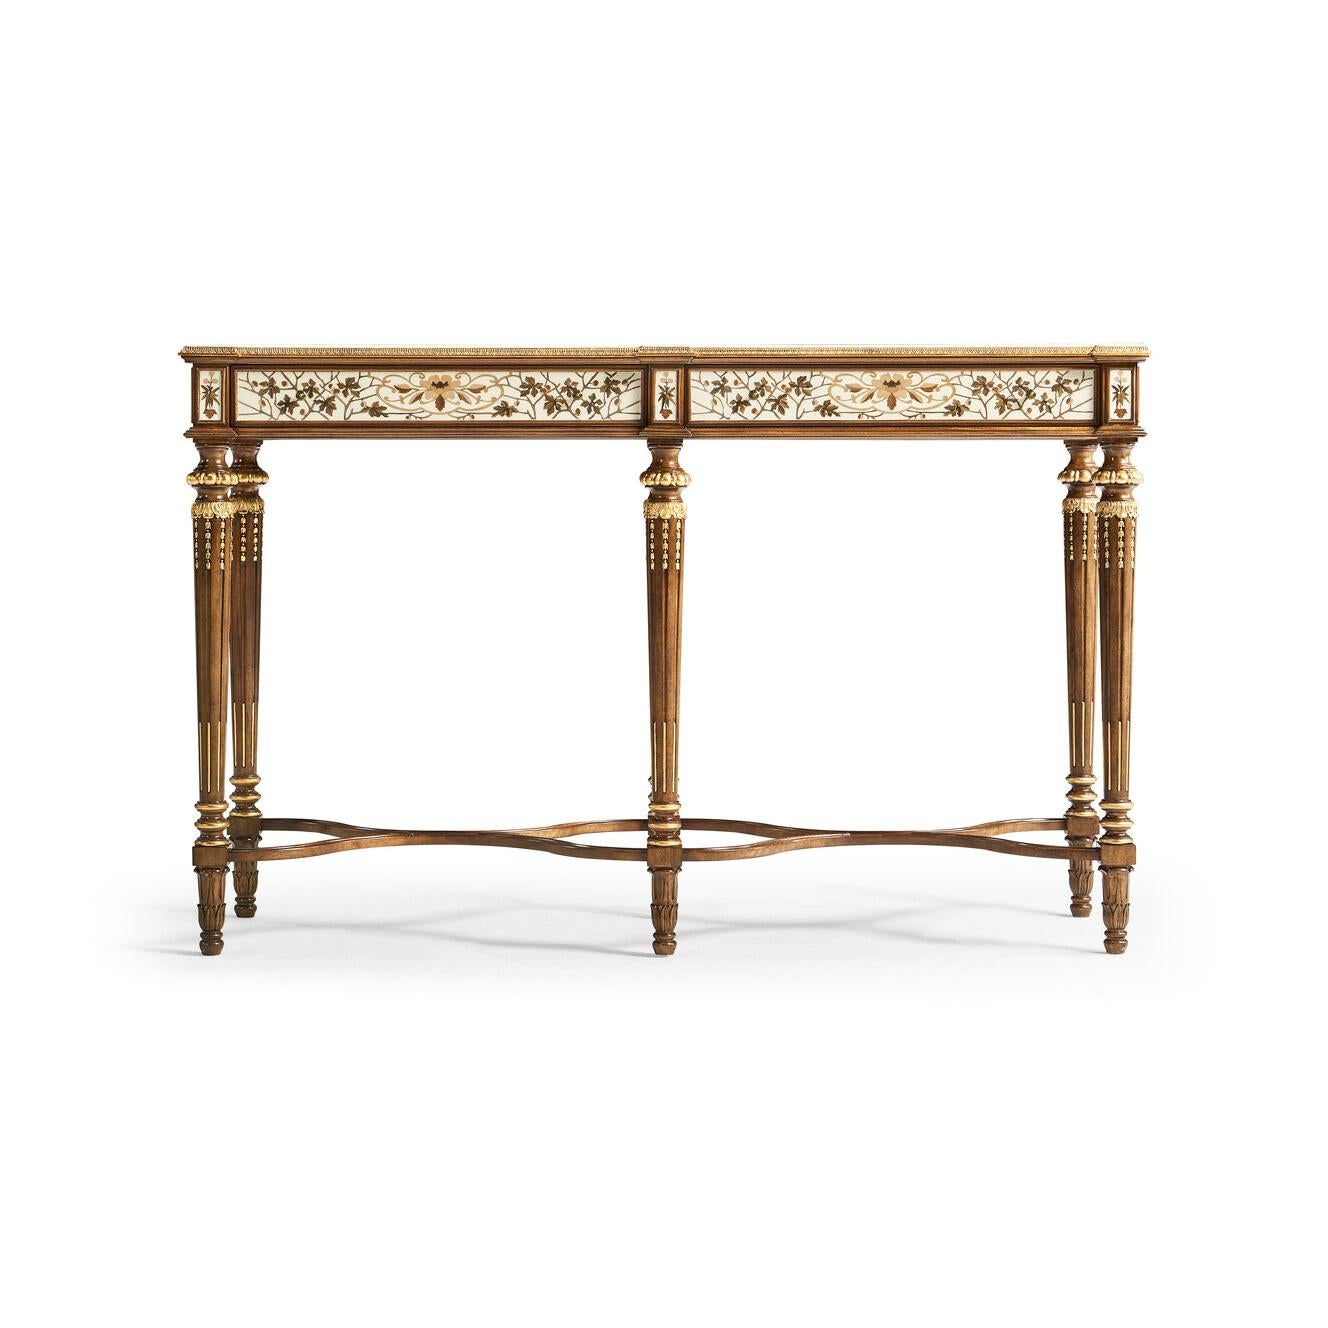 This masterpiece is adorned with a sumptuous maple leaf and acorn marquetry pattern, showcasing the splendor of nature with every intricately placed piece. The craftsmanship reaches new heights with the Scagliola technique, infusing the marquetry